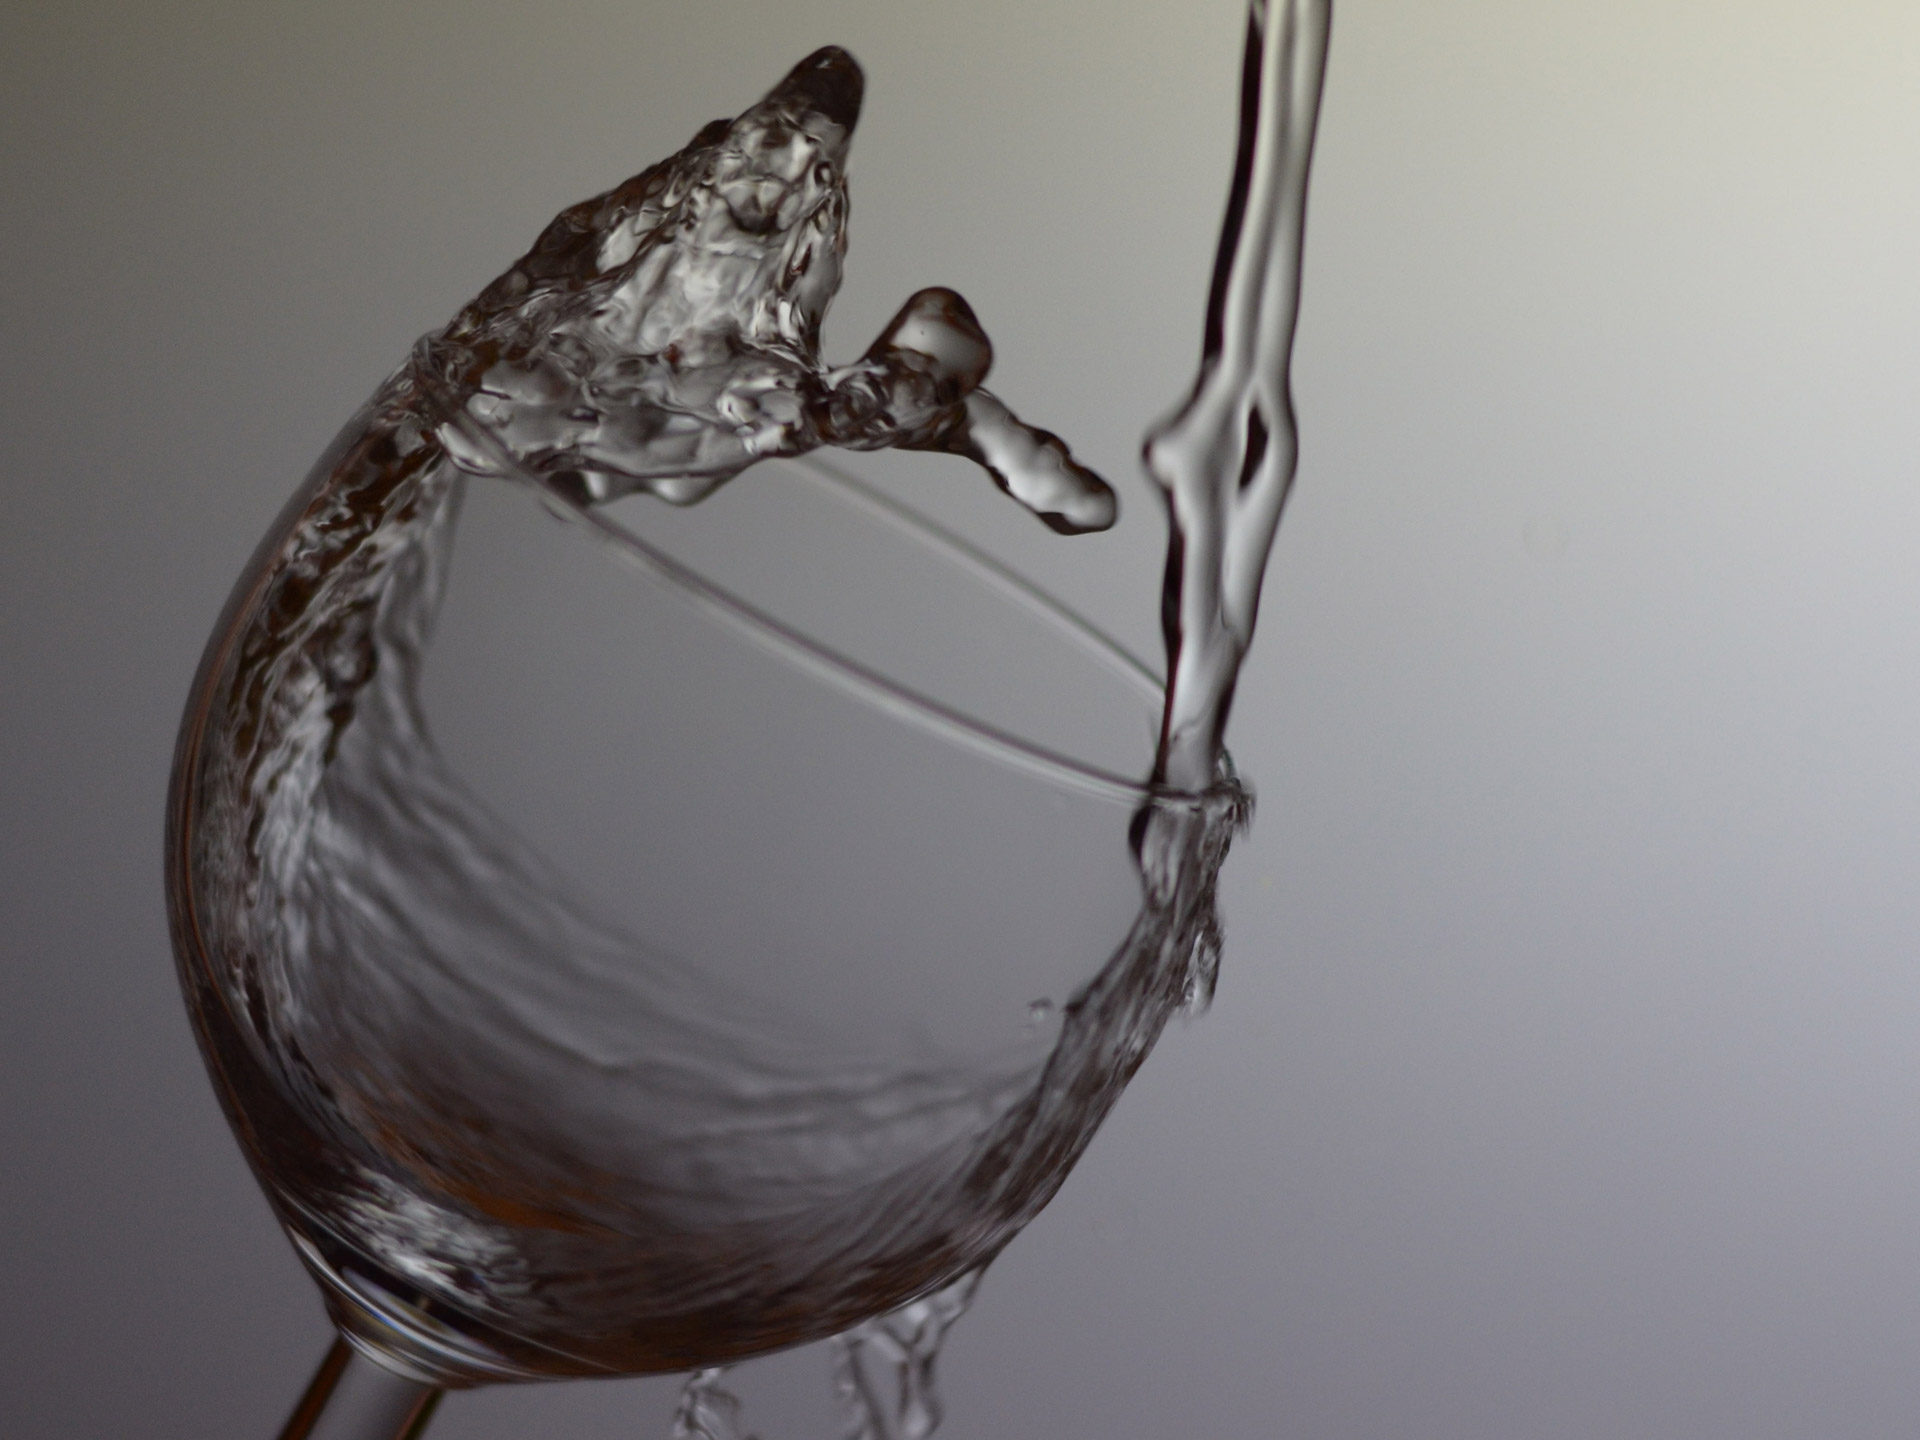 water glass experiment free photo